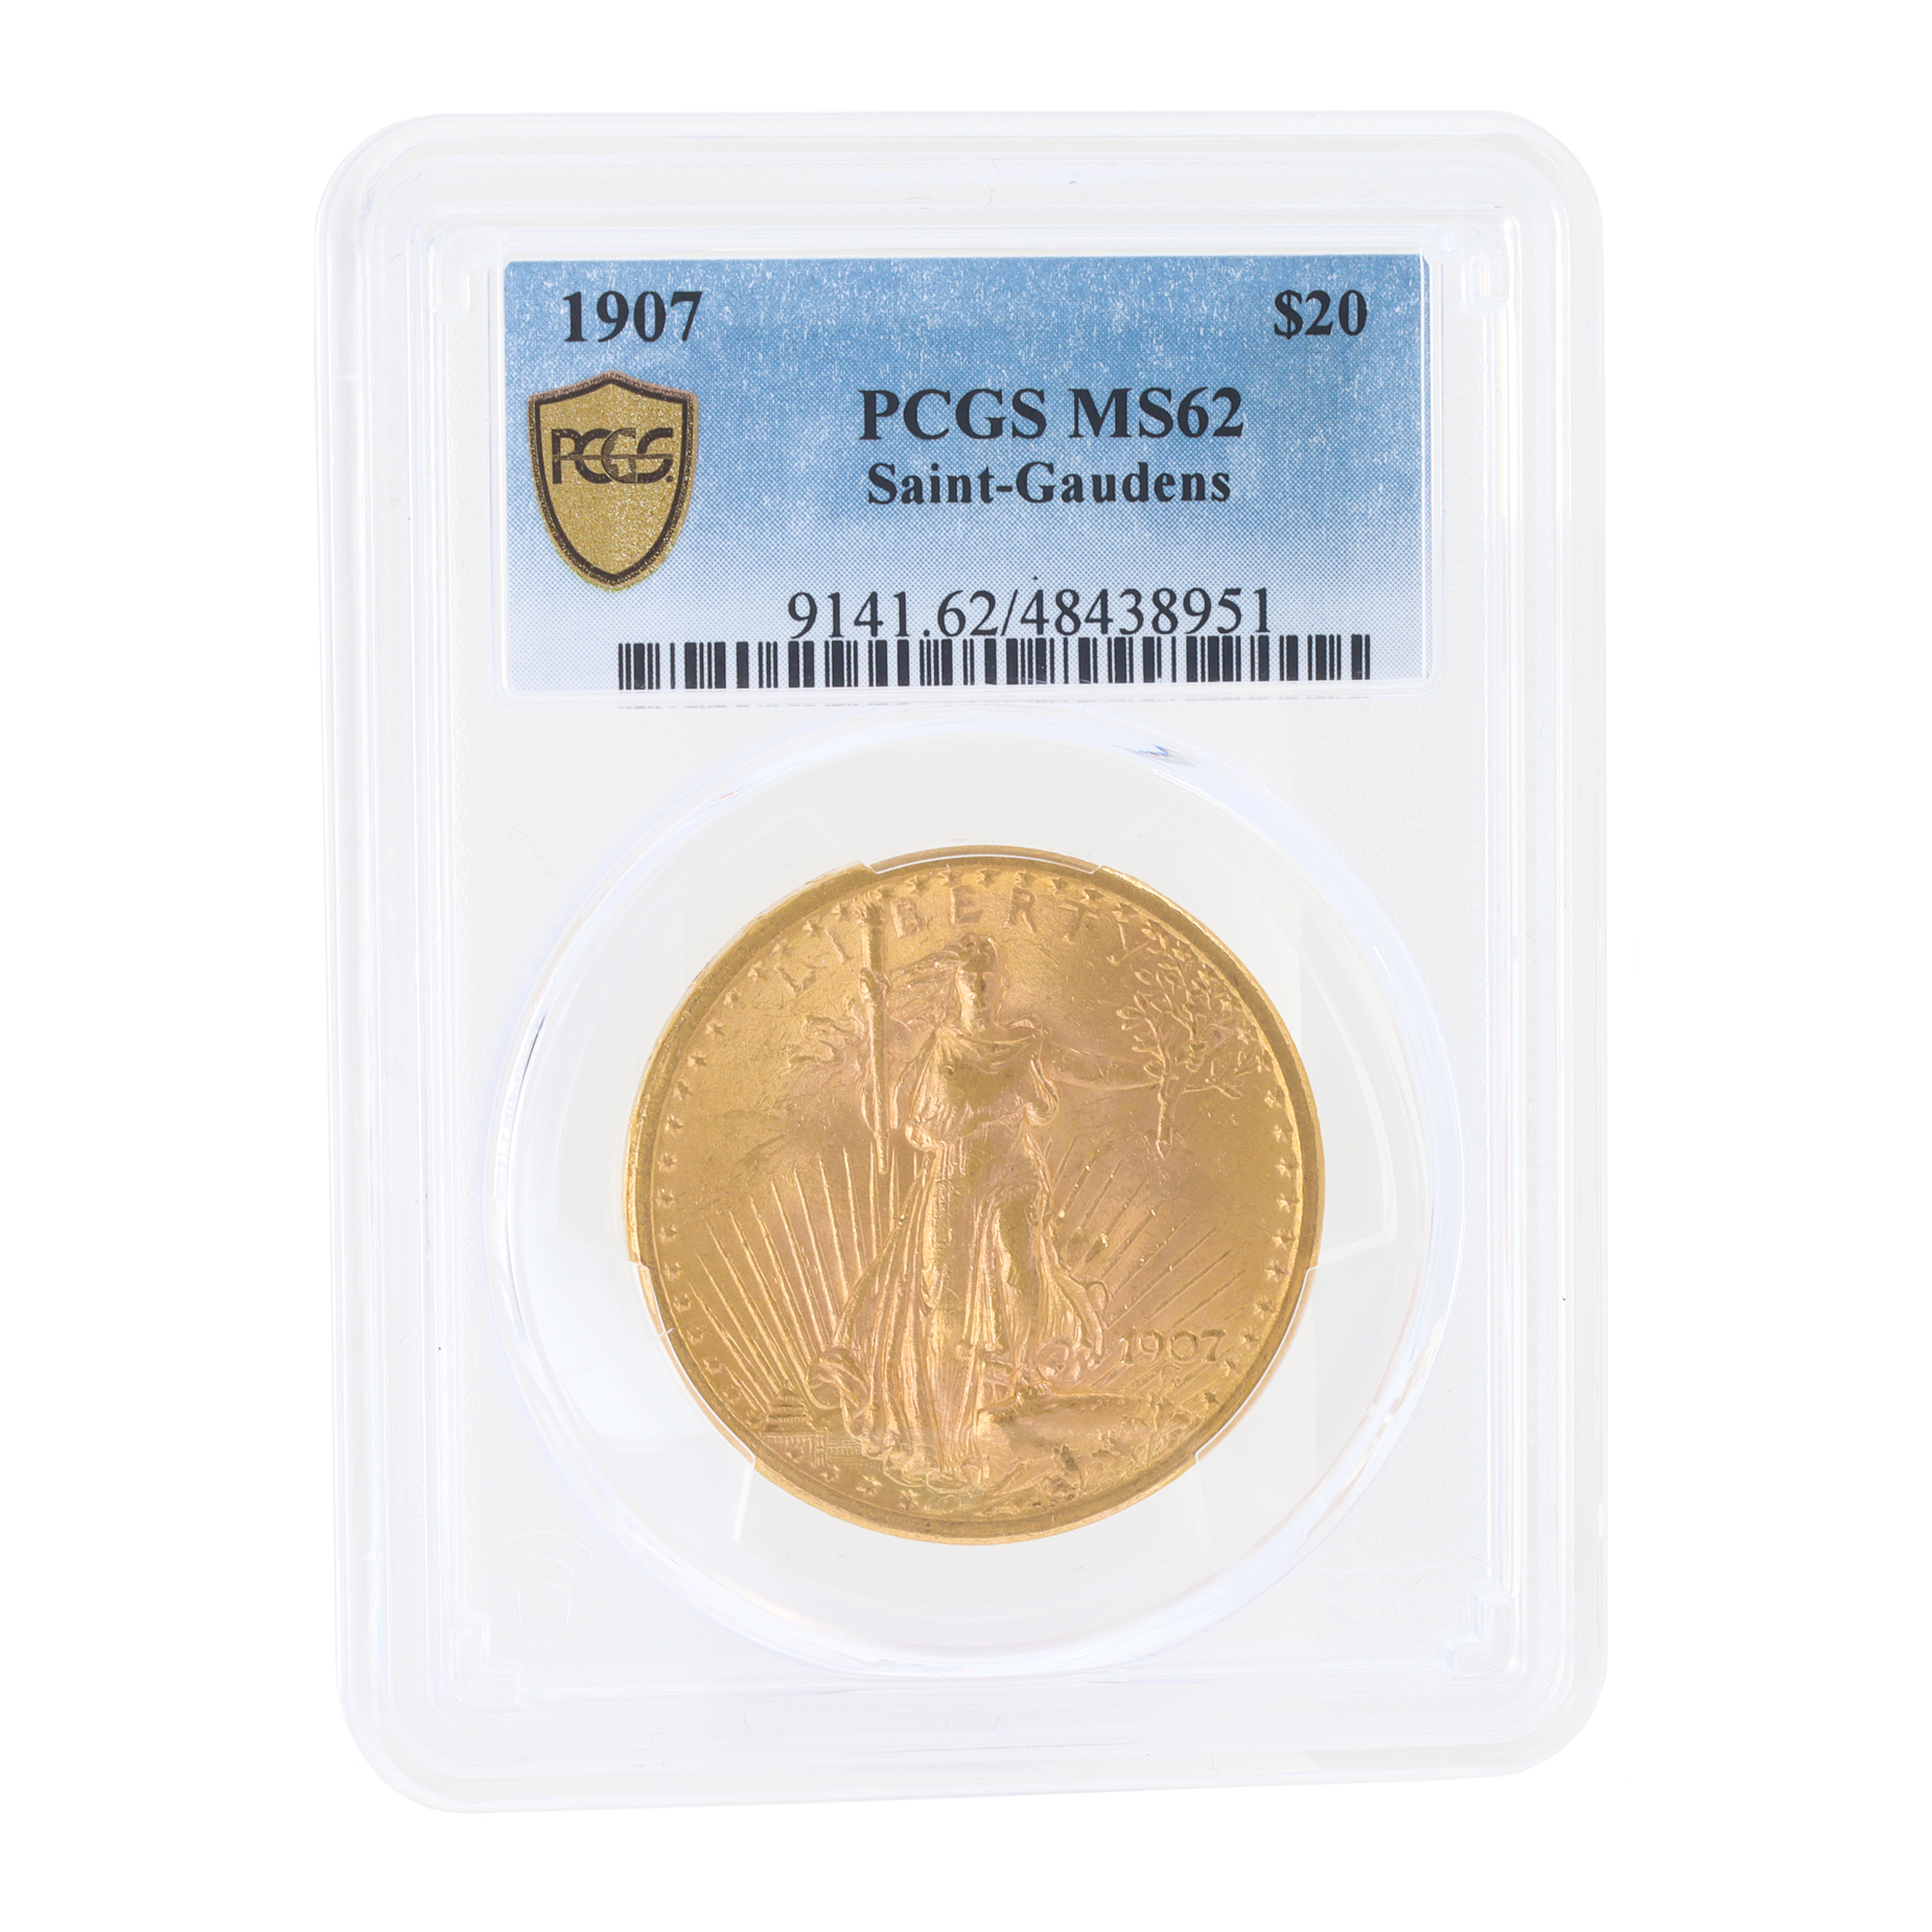 $20 Gold St. Gaudens Coin from 1907. Uncirculated PCGS grading of MS62 (Default)